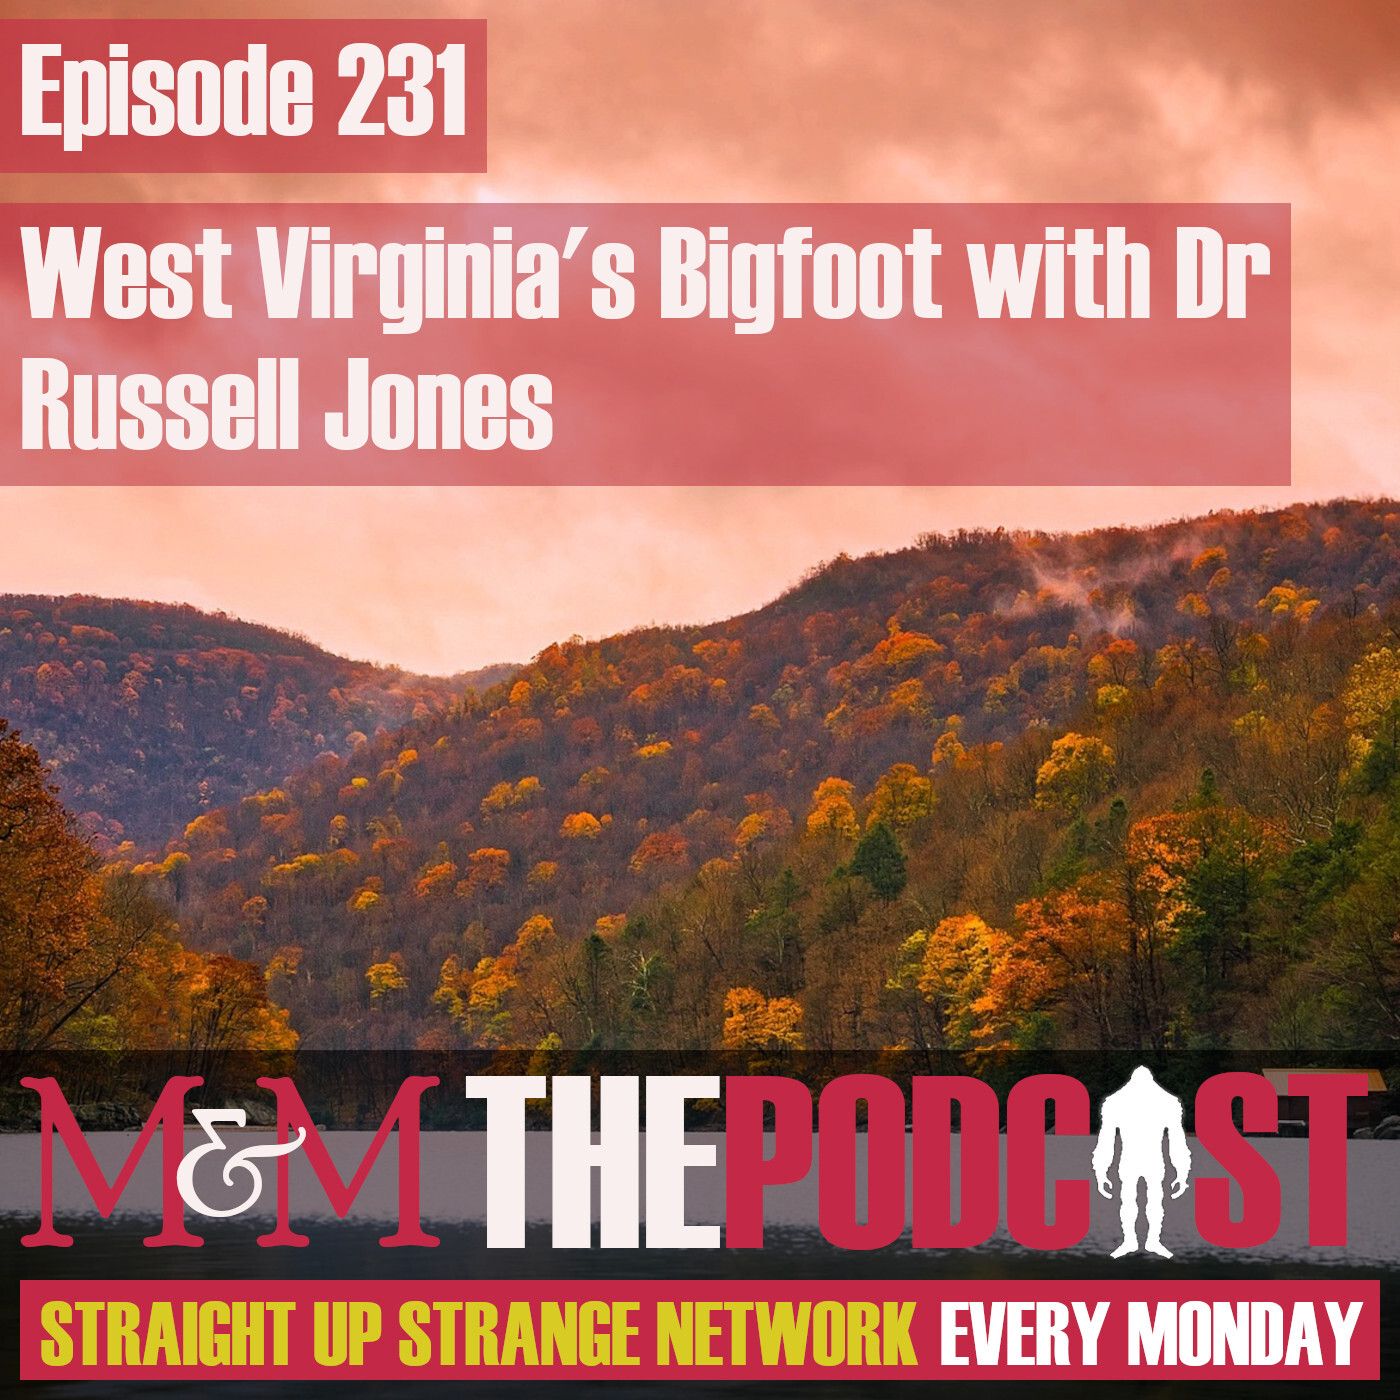 Mysteries and Monsters: Episode 231 West Virginia Bigfoot with Dr Russell Jones